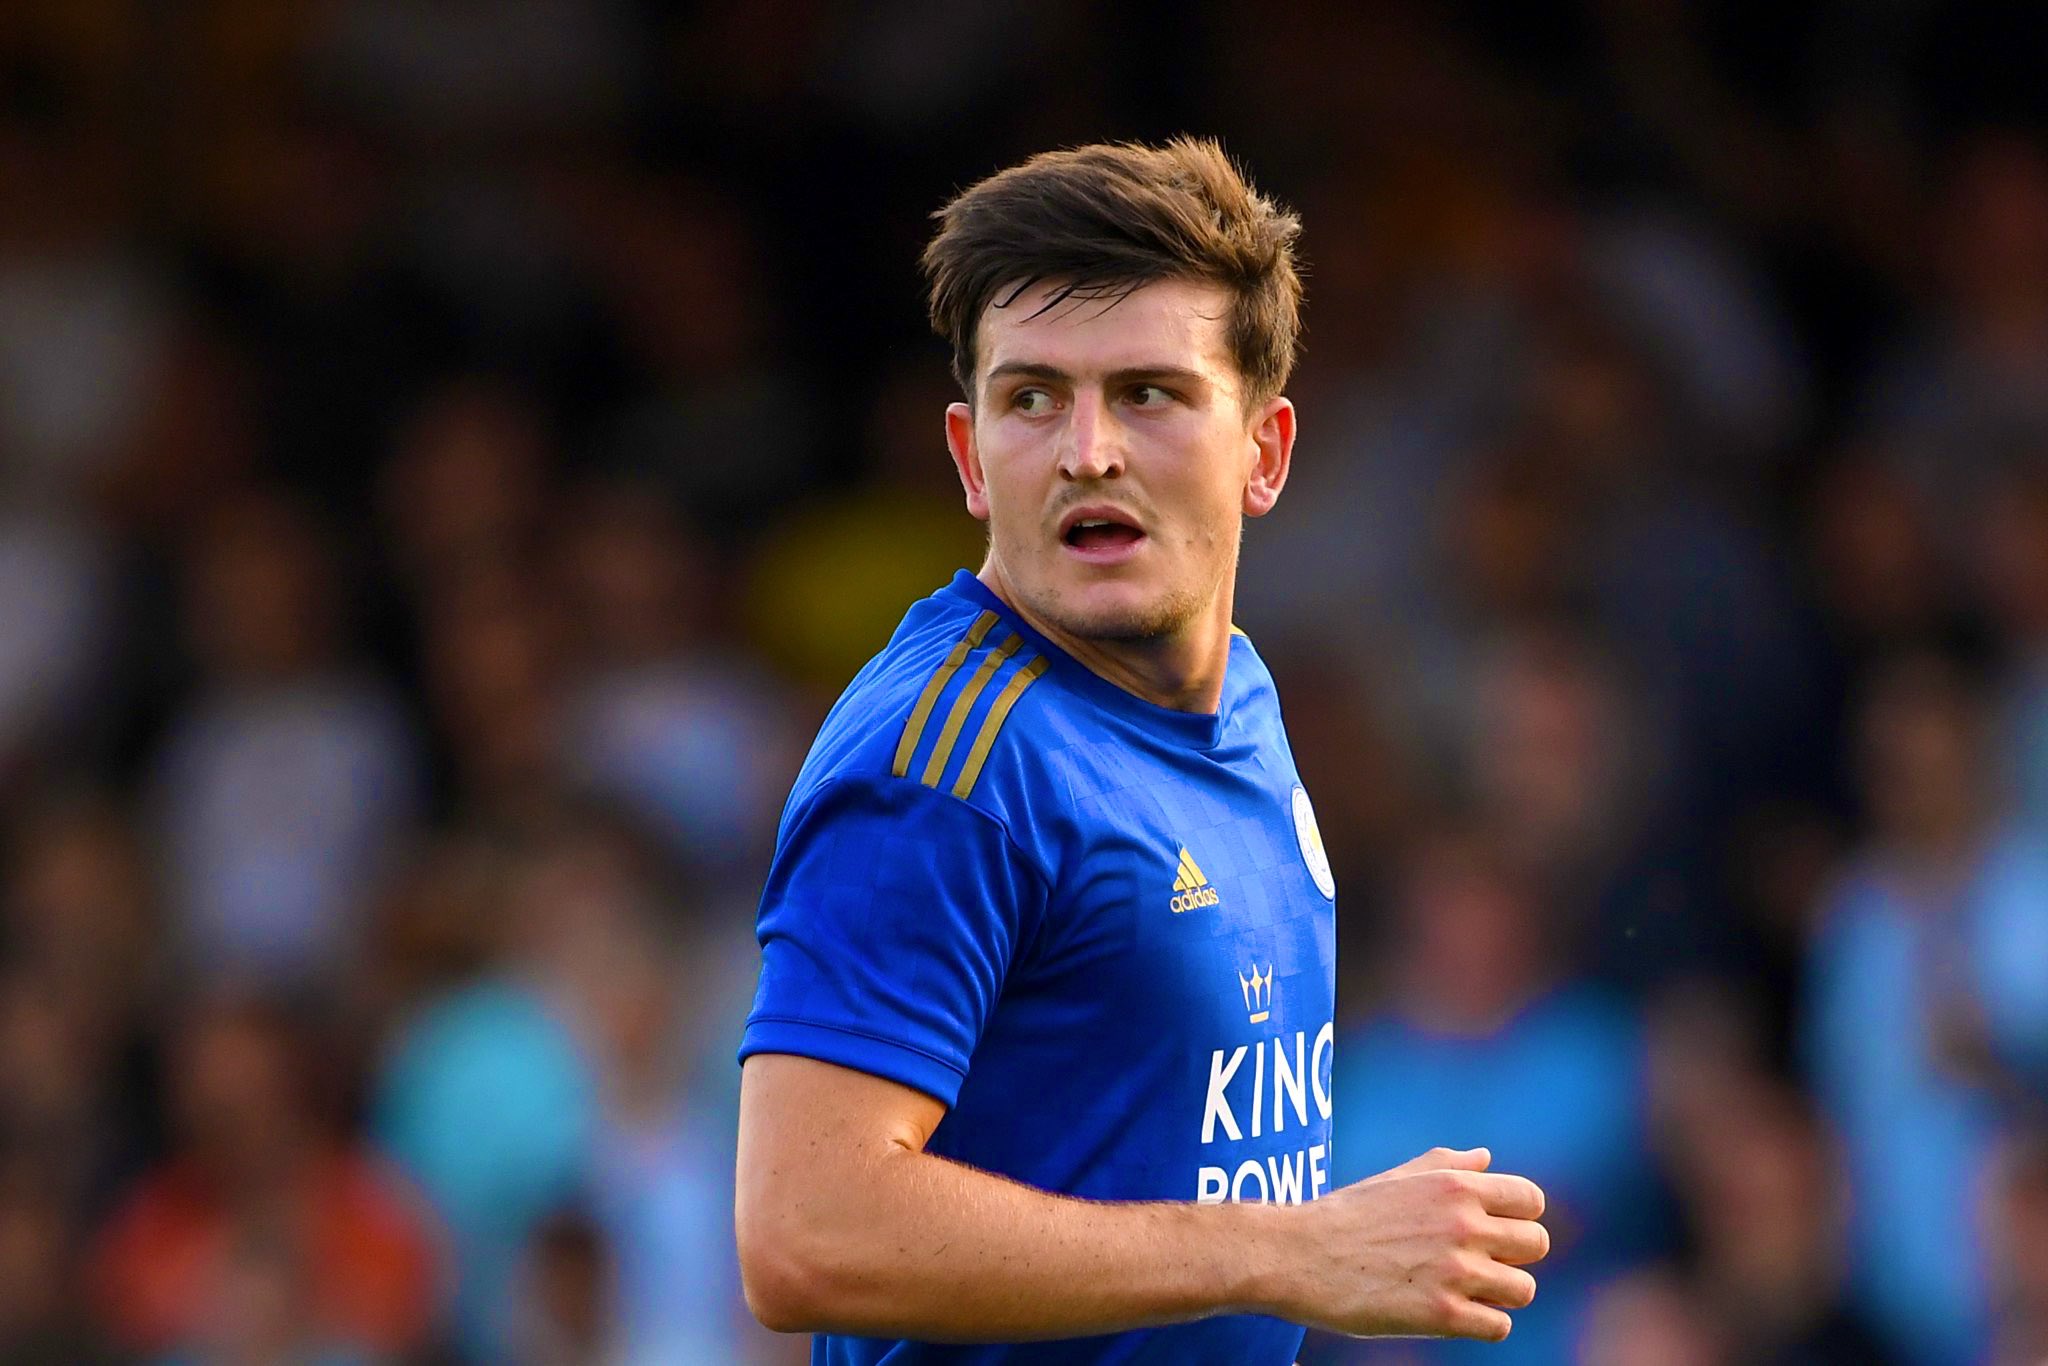 Man Utd in ‘final stages’ of completing Maguire transfer deal